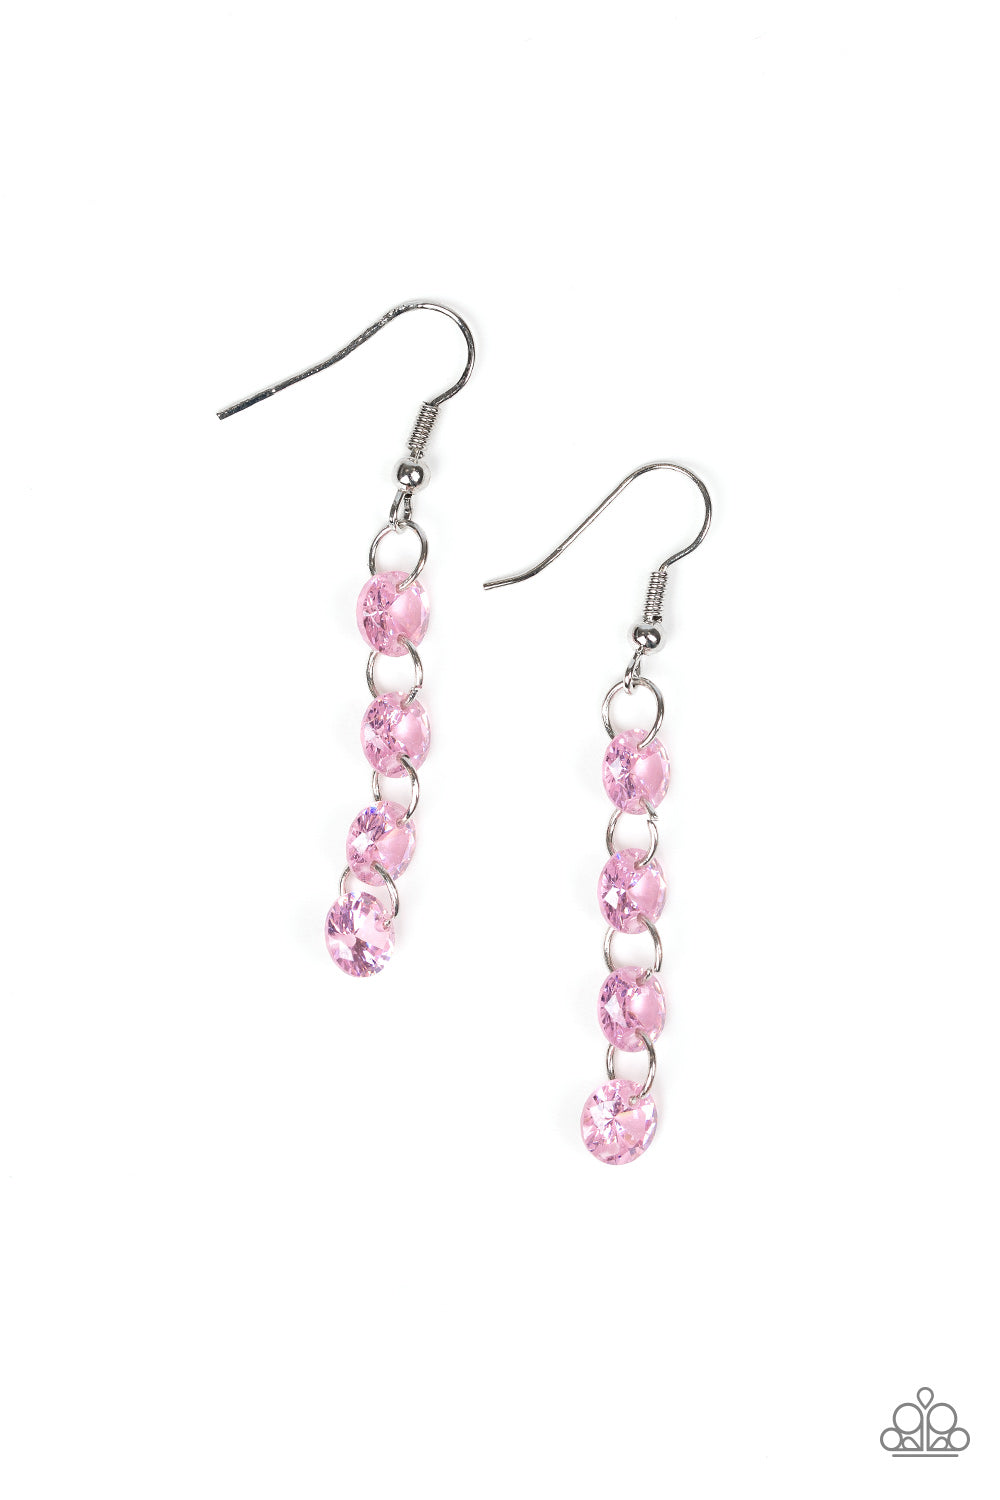 Trickle-Down Effect Pink Paparazzi Earring Cashmere Pink Jewels - Cashmere Pink Jewels & Accessories, Cashmere Pink Jewels & Accessories - Paparazzi